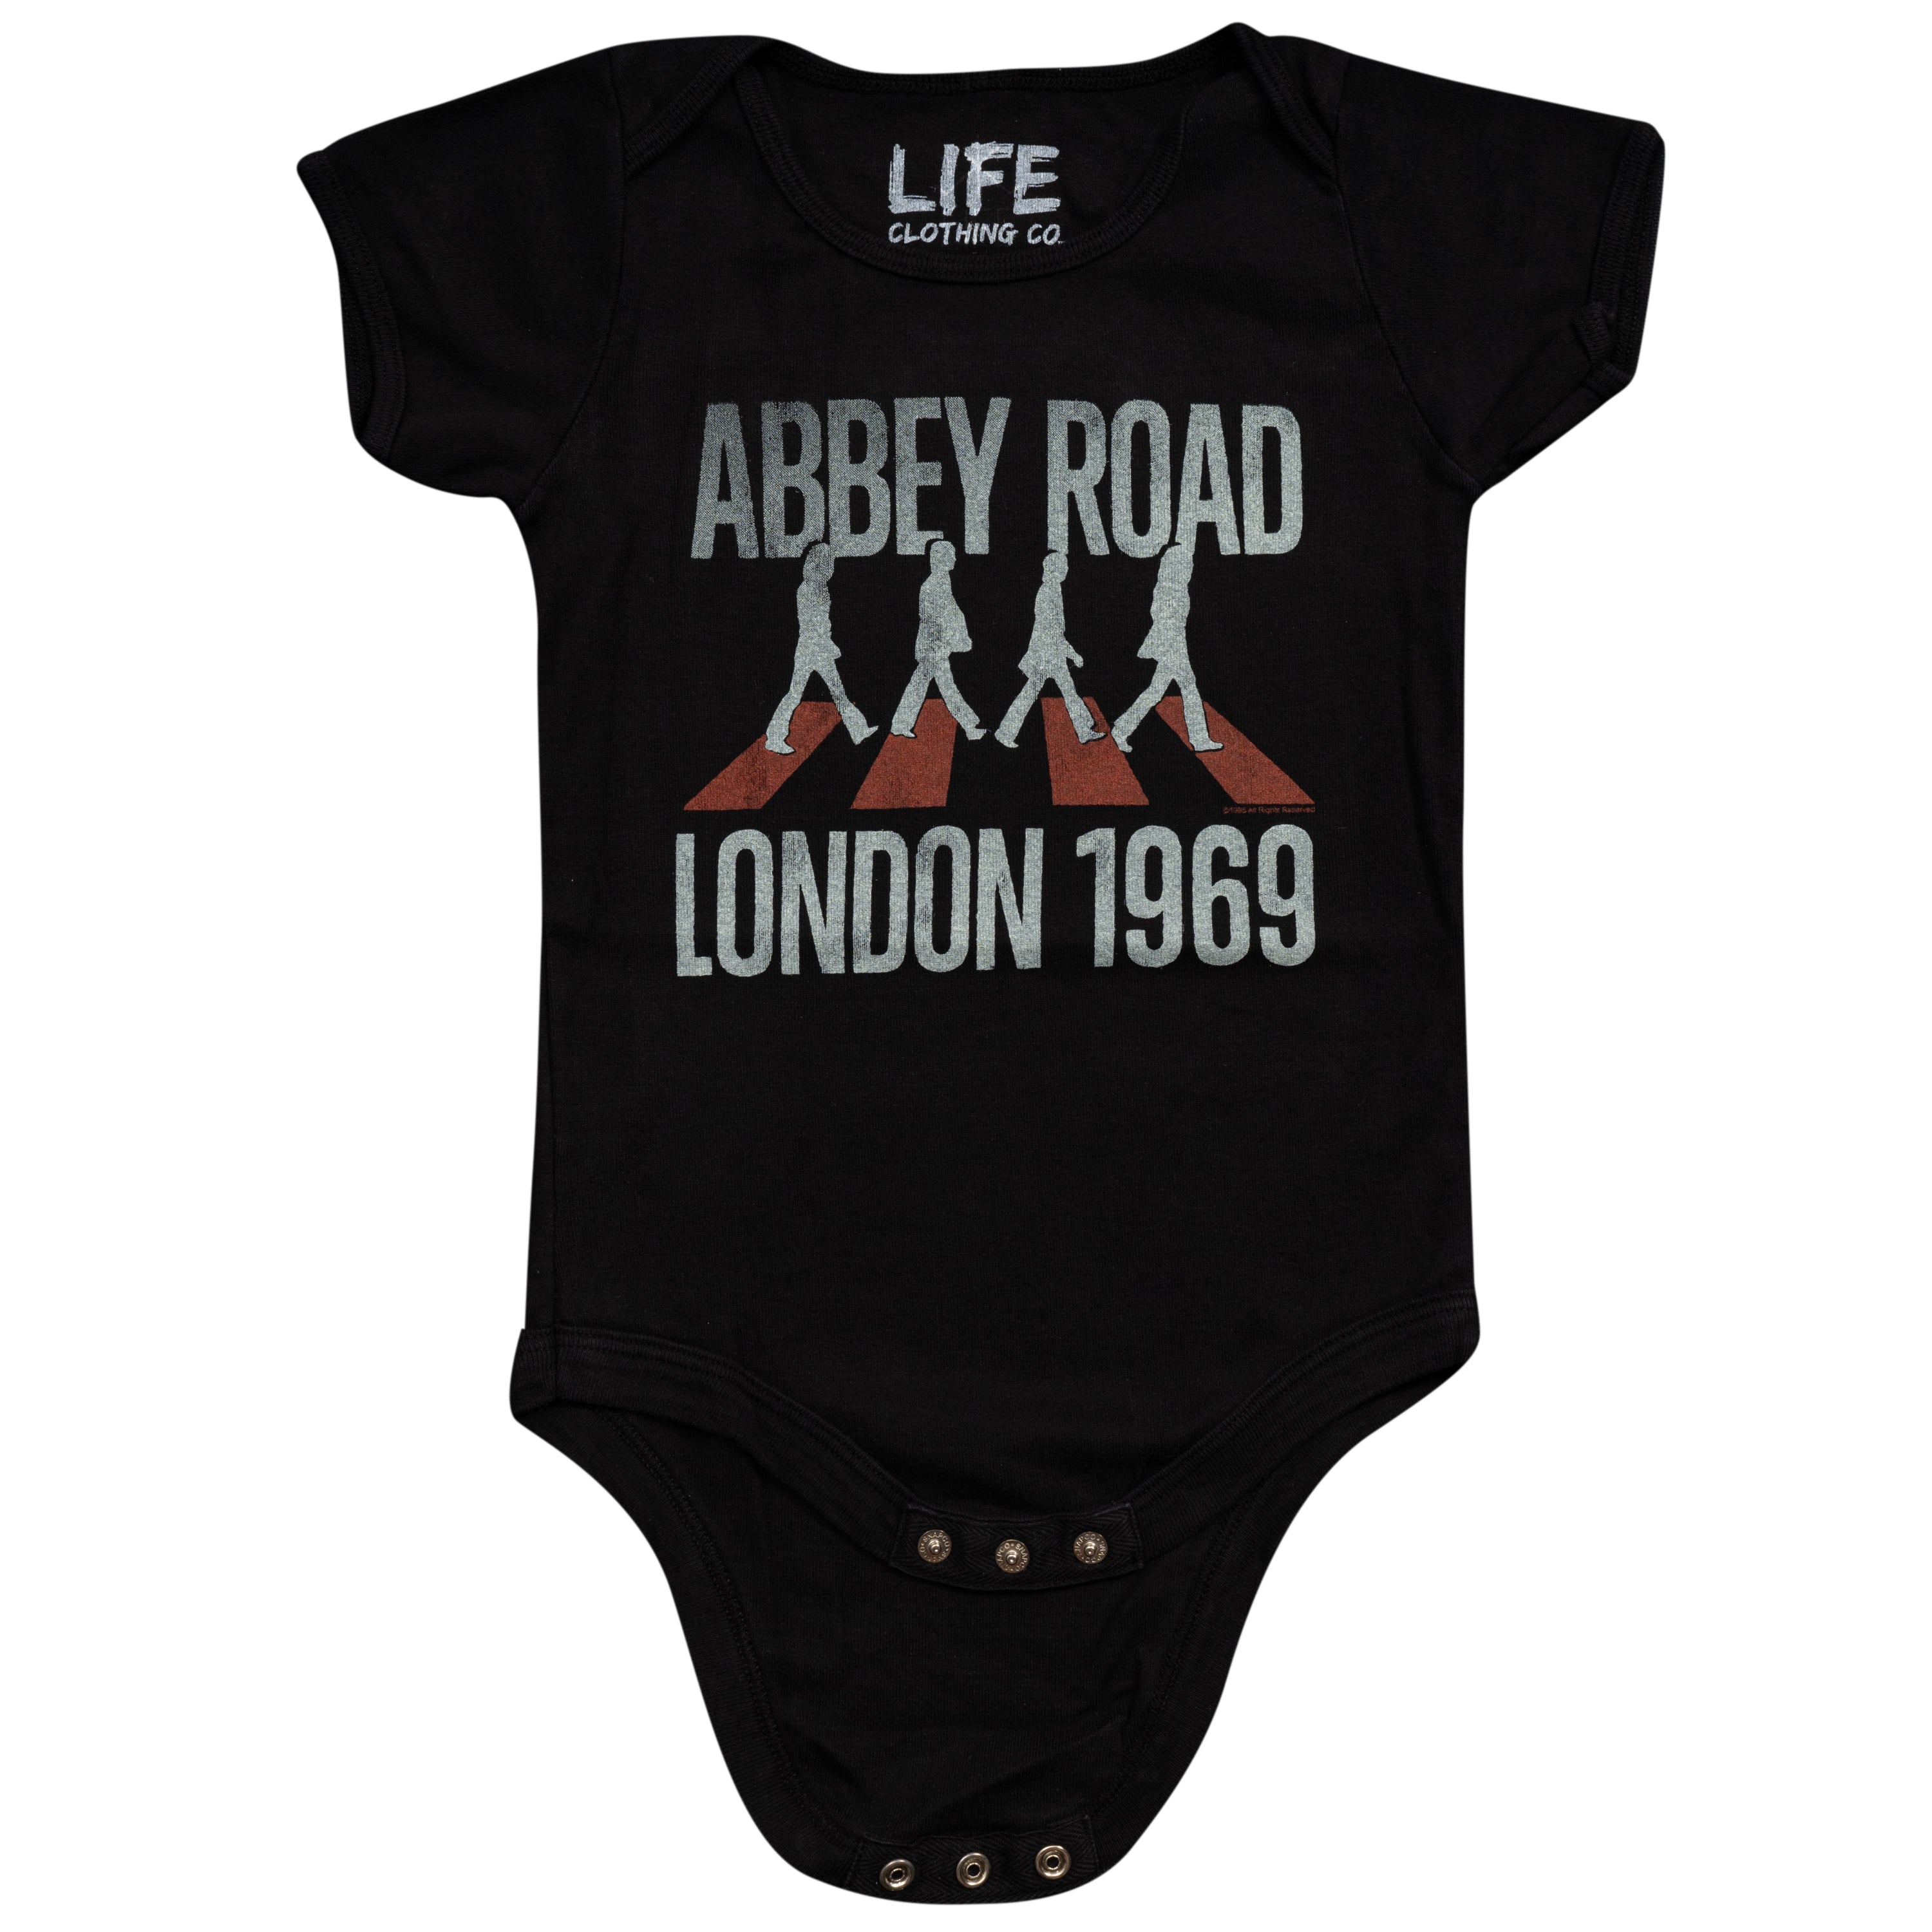 The Beatles Abbey Road London 1969 Black Infant Baby One Piece Romper